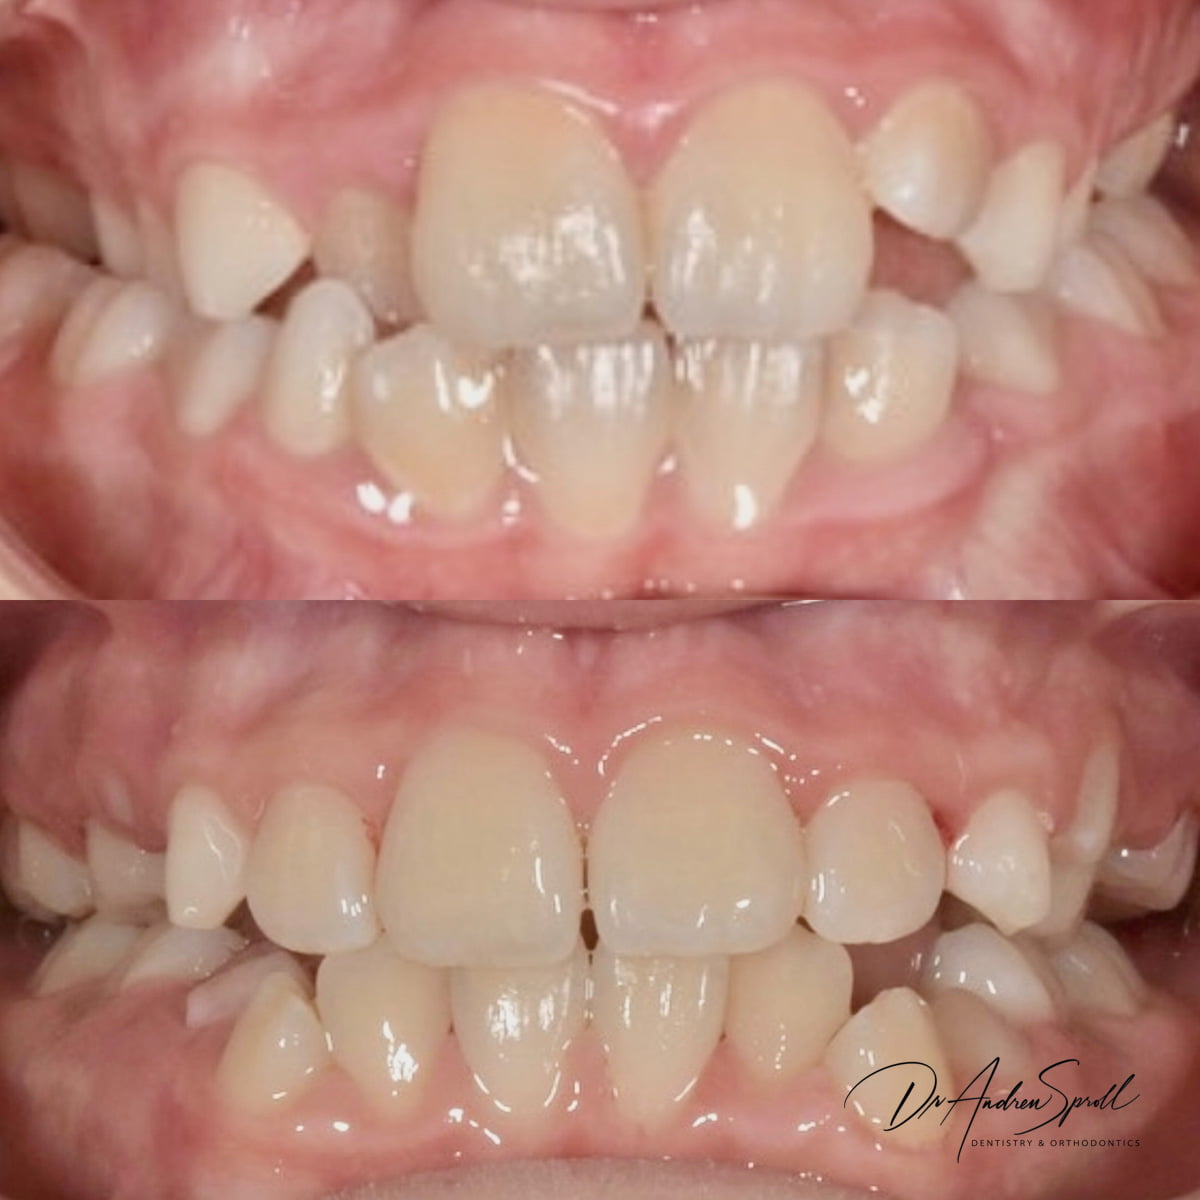 Dr Andrew Sproll patient before and after